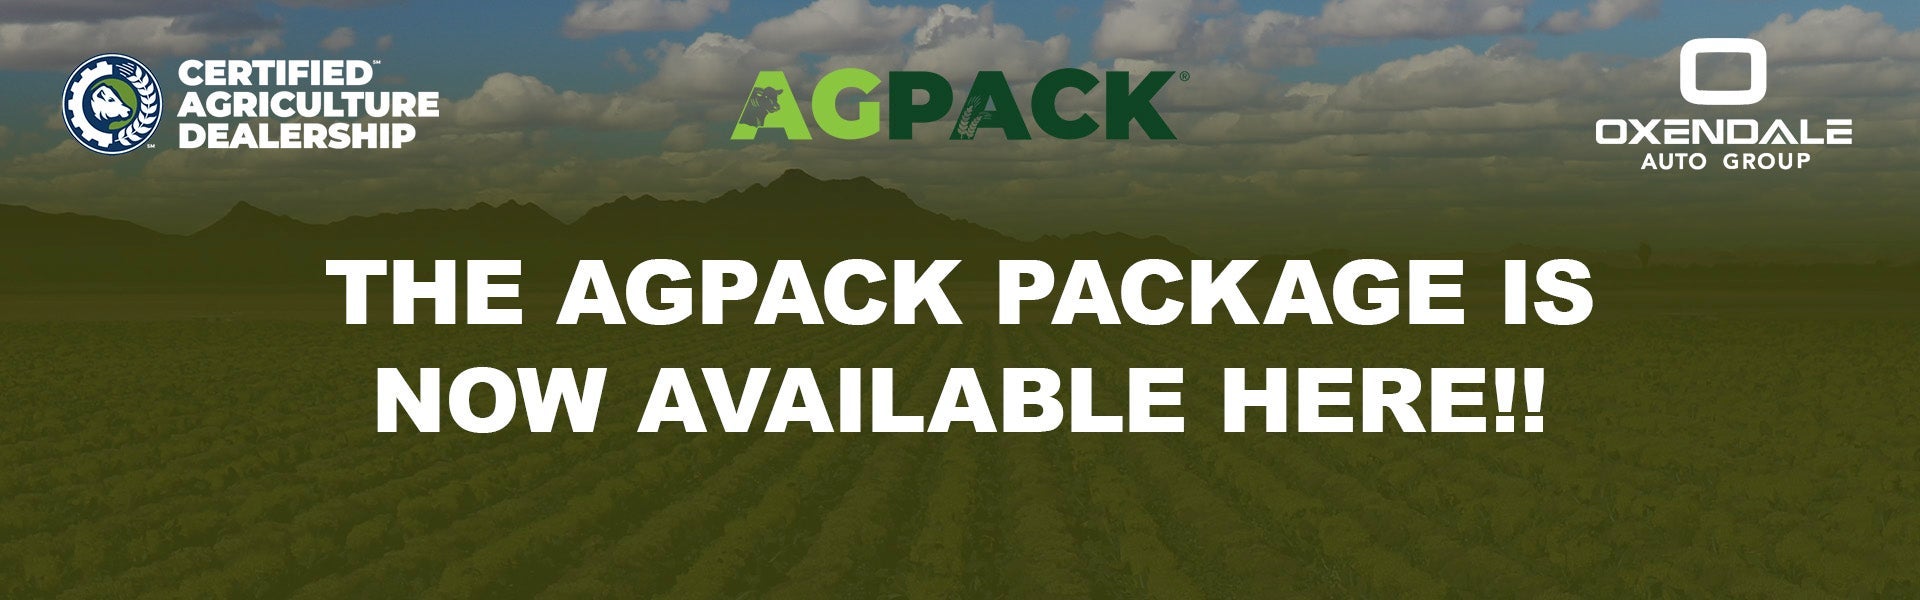 The AgPack Package is available here now